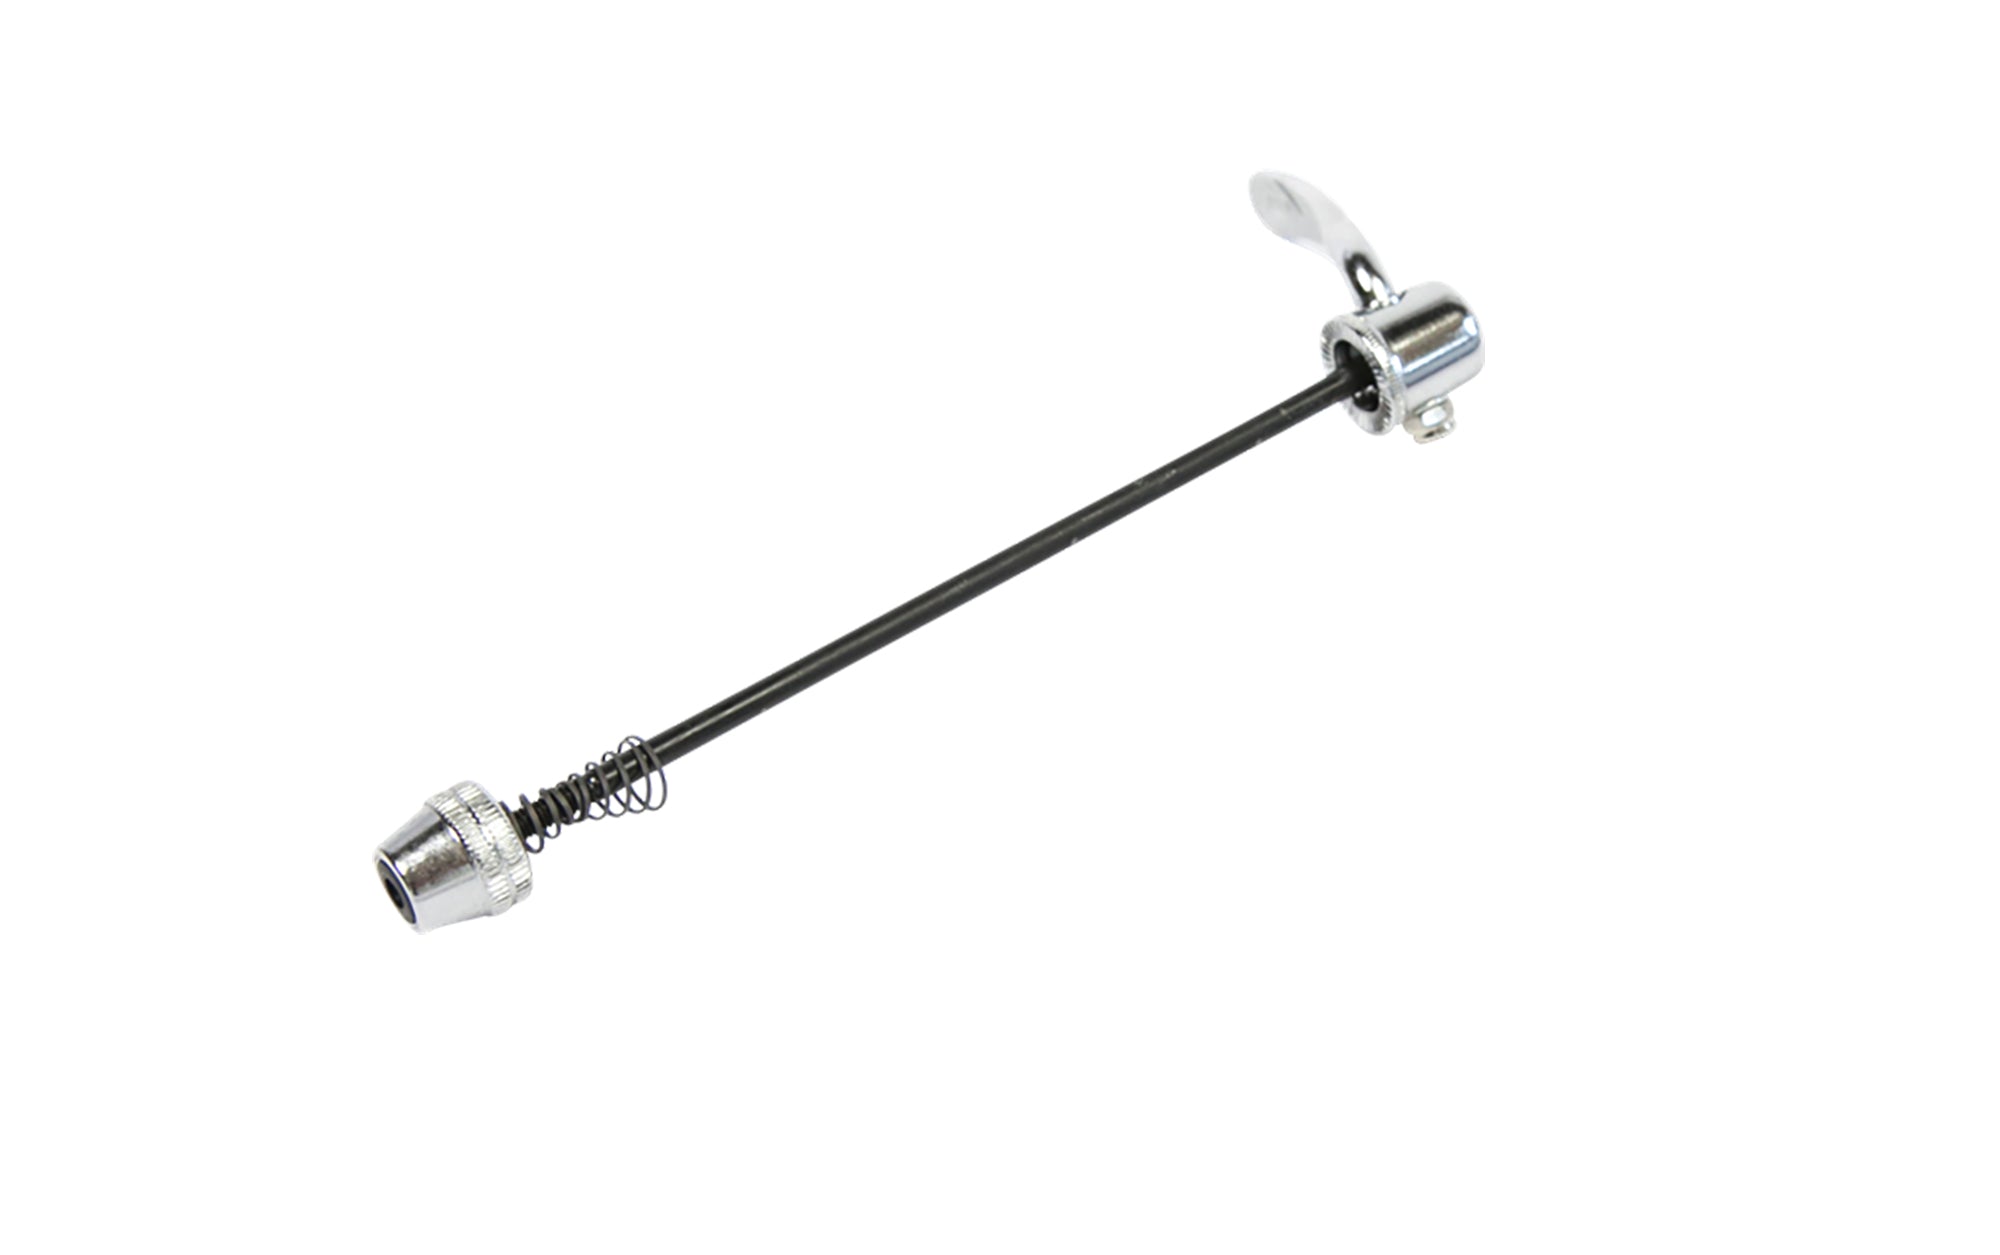 Saris Quick Release Trainer Skewer drive side